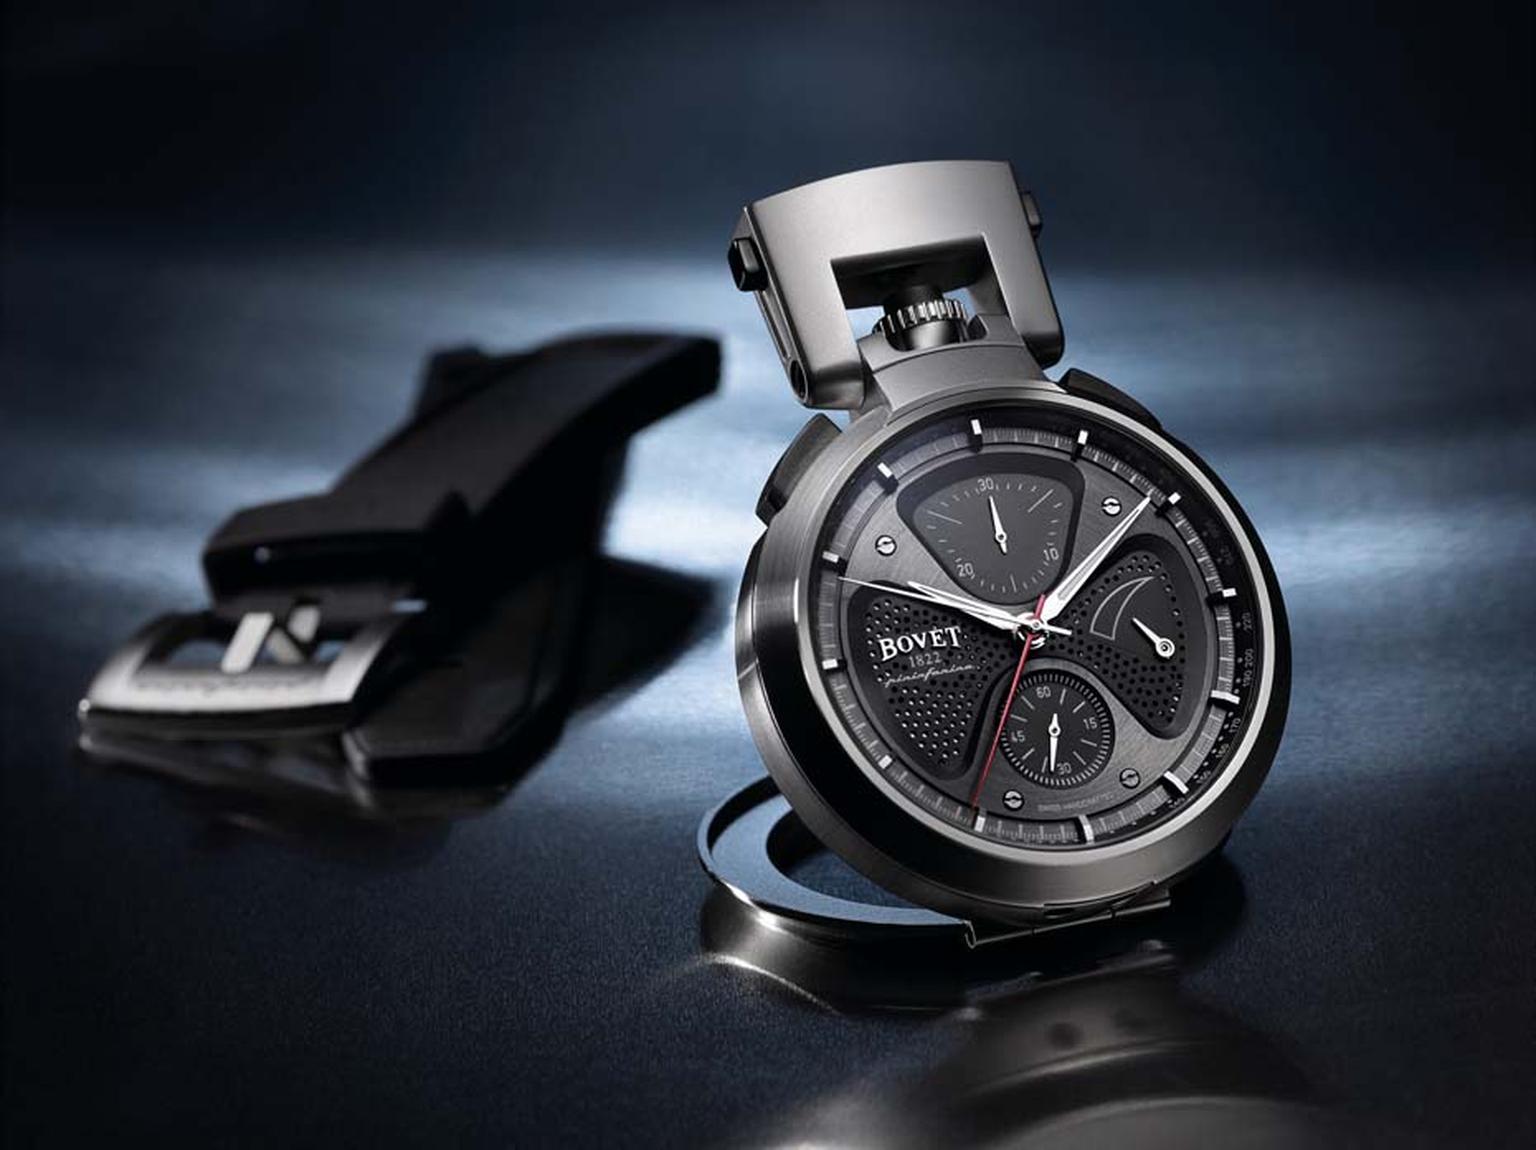 Inspired by the Ferrari concept car created by the Italian design house Pininfarina in 2013, the Bovet by Pininfarina 2014 Sergio Split-Second Chronograph is a sleek yet robust collaboration that also features Bovet's signature Amadeo® convertible system.